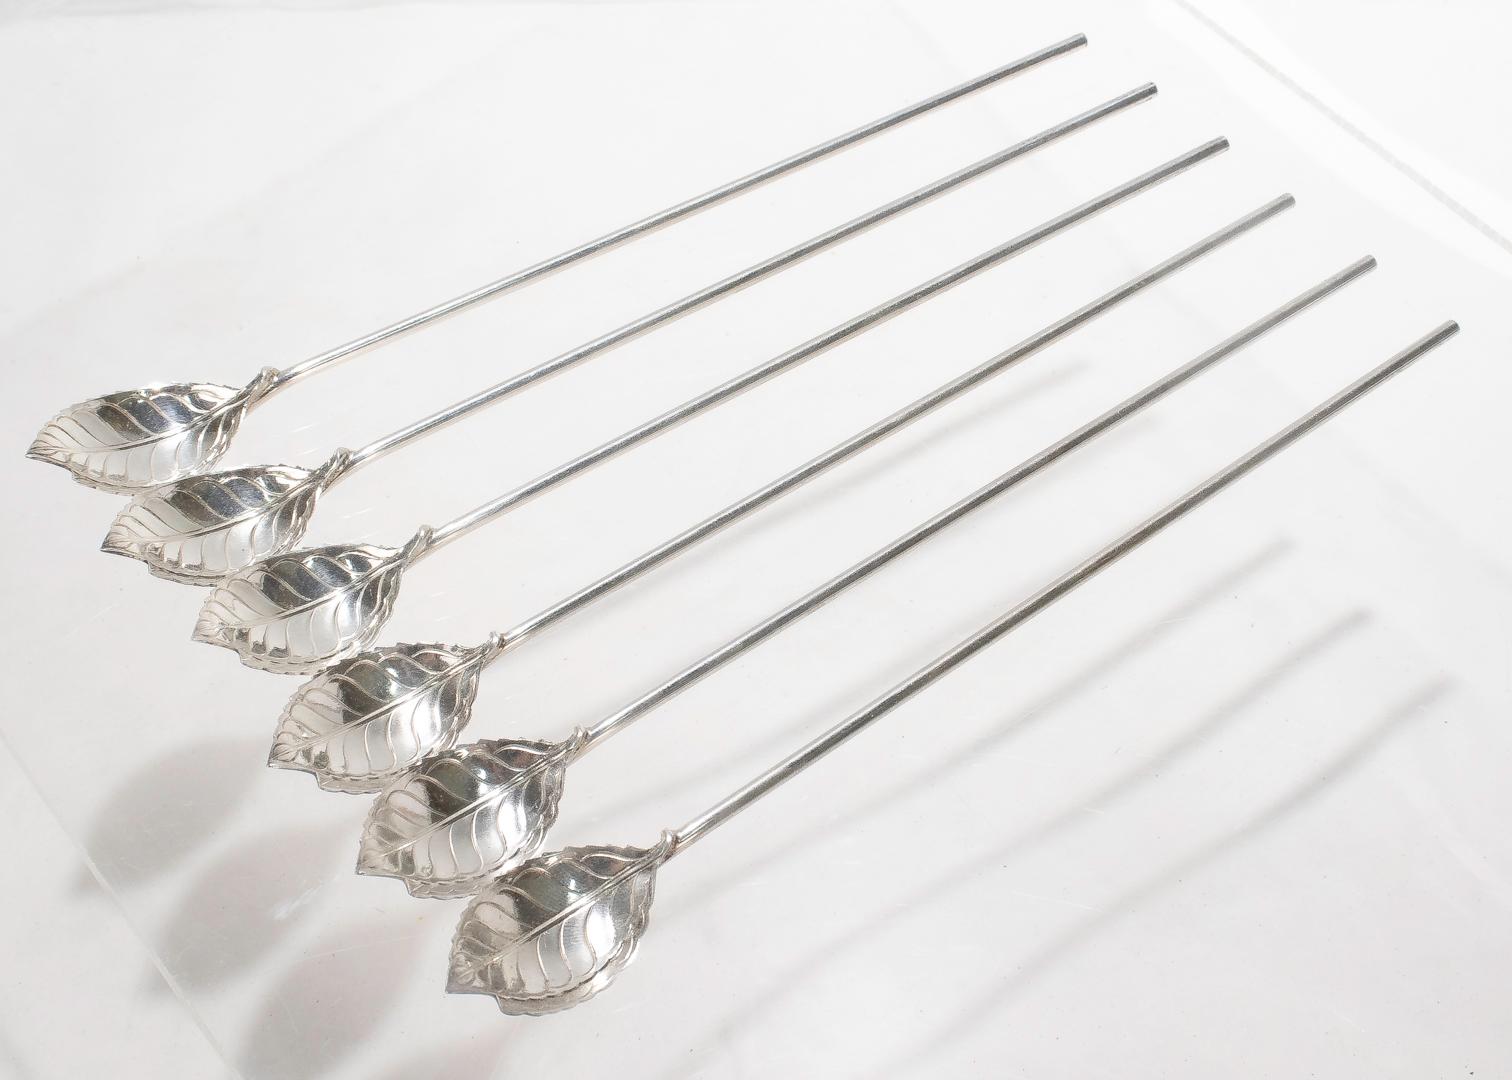 A fine set of 6 mint julep spoons (or ice tea straws).

In sterling silver.

By Tiffany & Co. 

With figural leaf form spoon bowls mounted on long narrow straw handle.

Simply great style for your favorite Summer drink!

Date:
Mid-20th